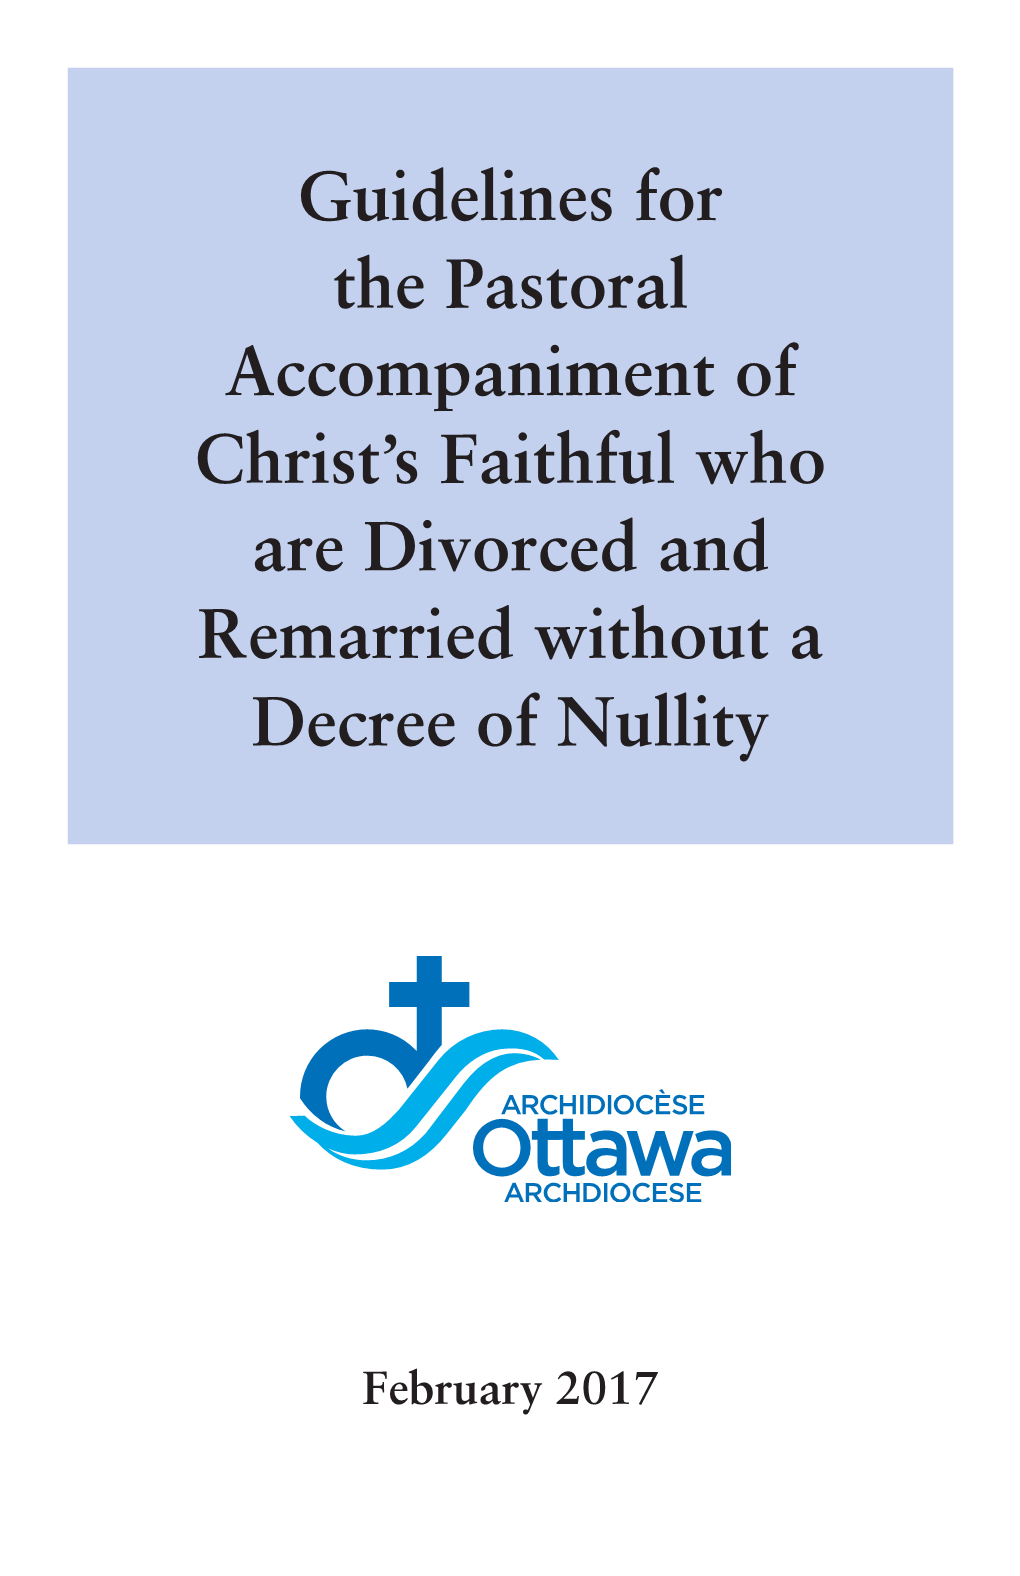 Guidelines for the Pastoral Accompaniment of Christ's Faithful